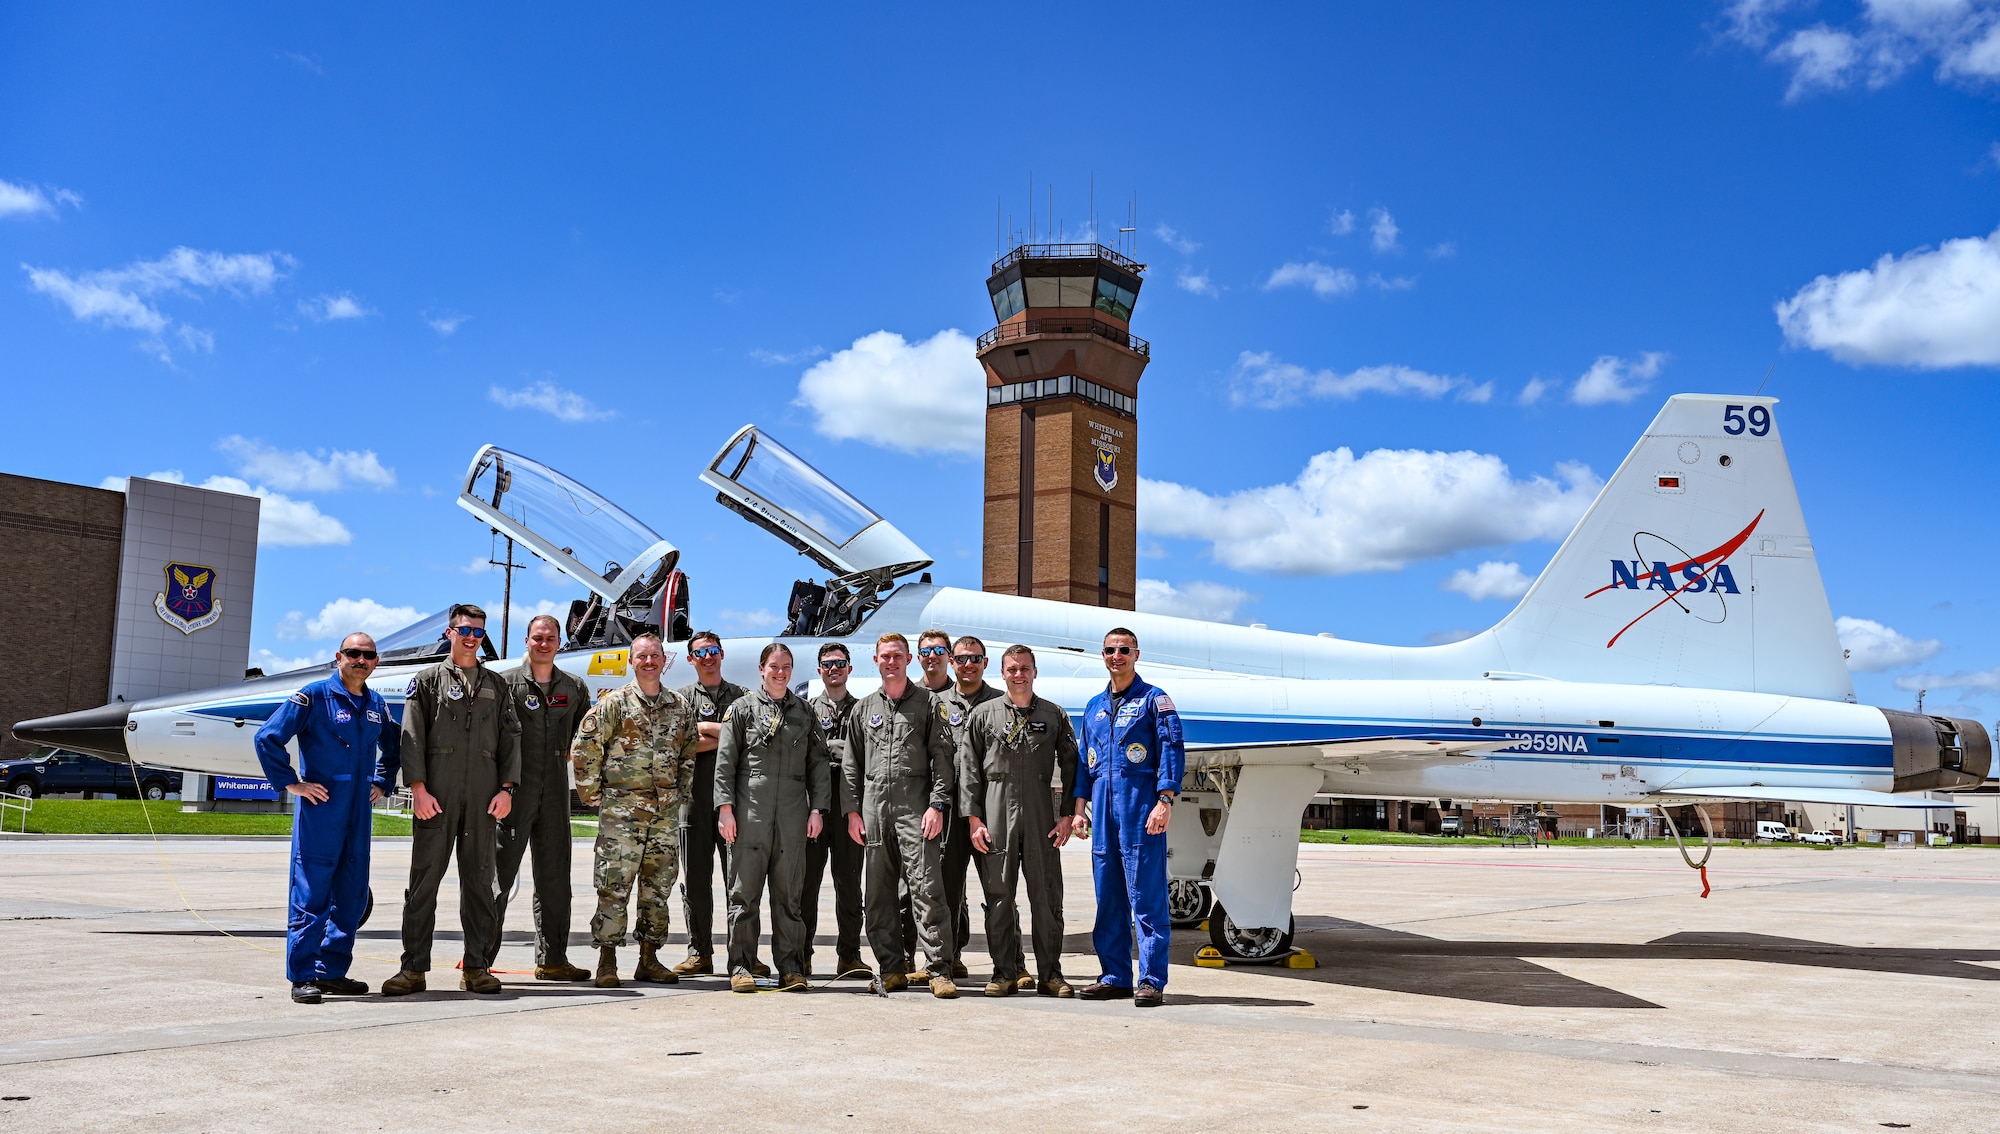 U.S. Air Force Airmen and NASA personnel discuss the T-38N Talon at Whiteman Air Force Base, Missouri, June 7, 2022. NASA employs the T-38N Talon to prepare astronauts and aircrews to respond to events that may jeopardize the mission. Both the 509th Bomb Wing and NASA utilize the T-38 program to ensure mission readiness.